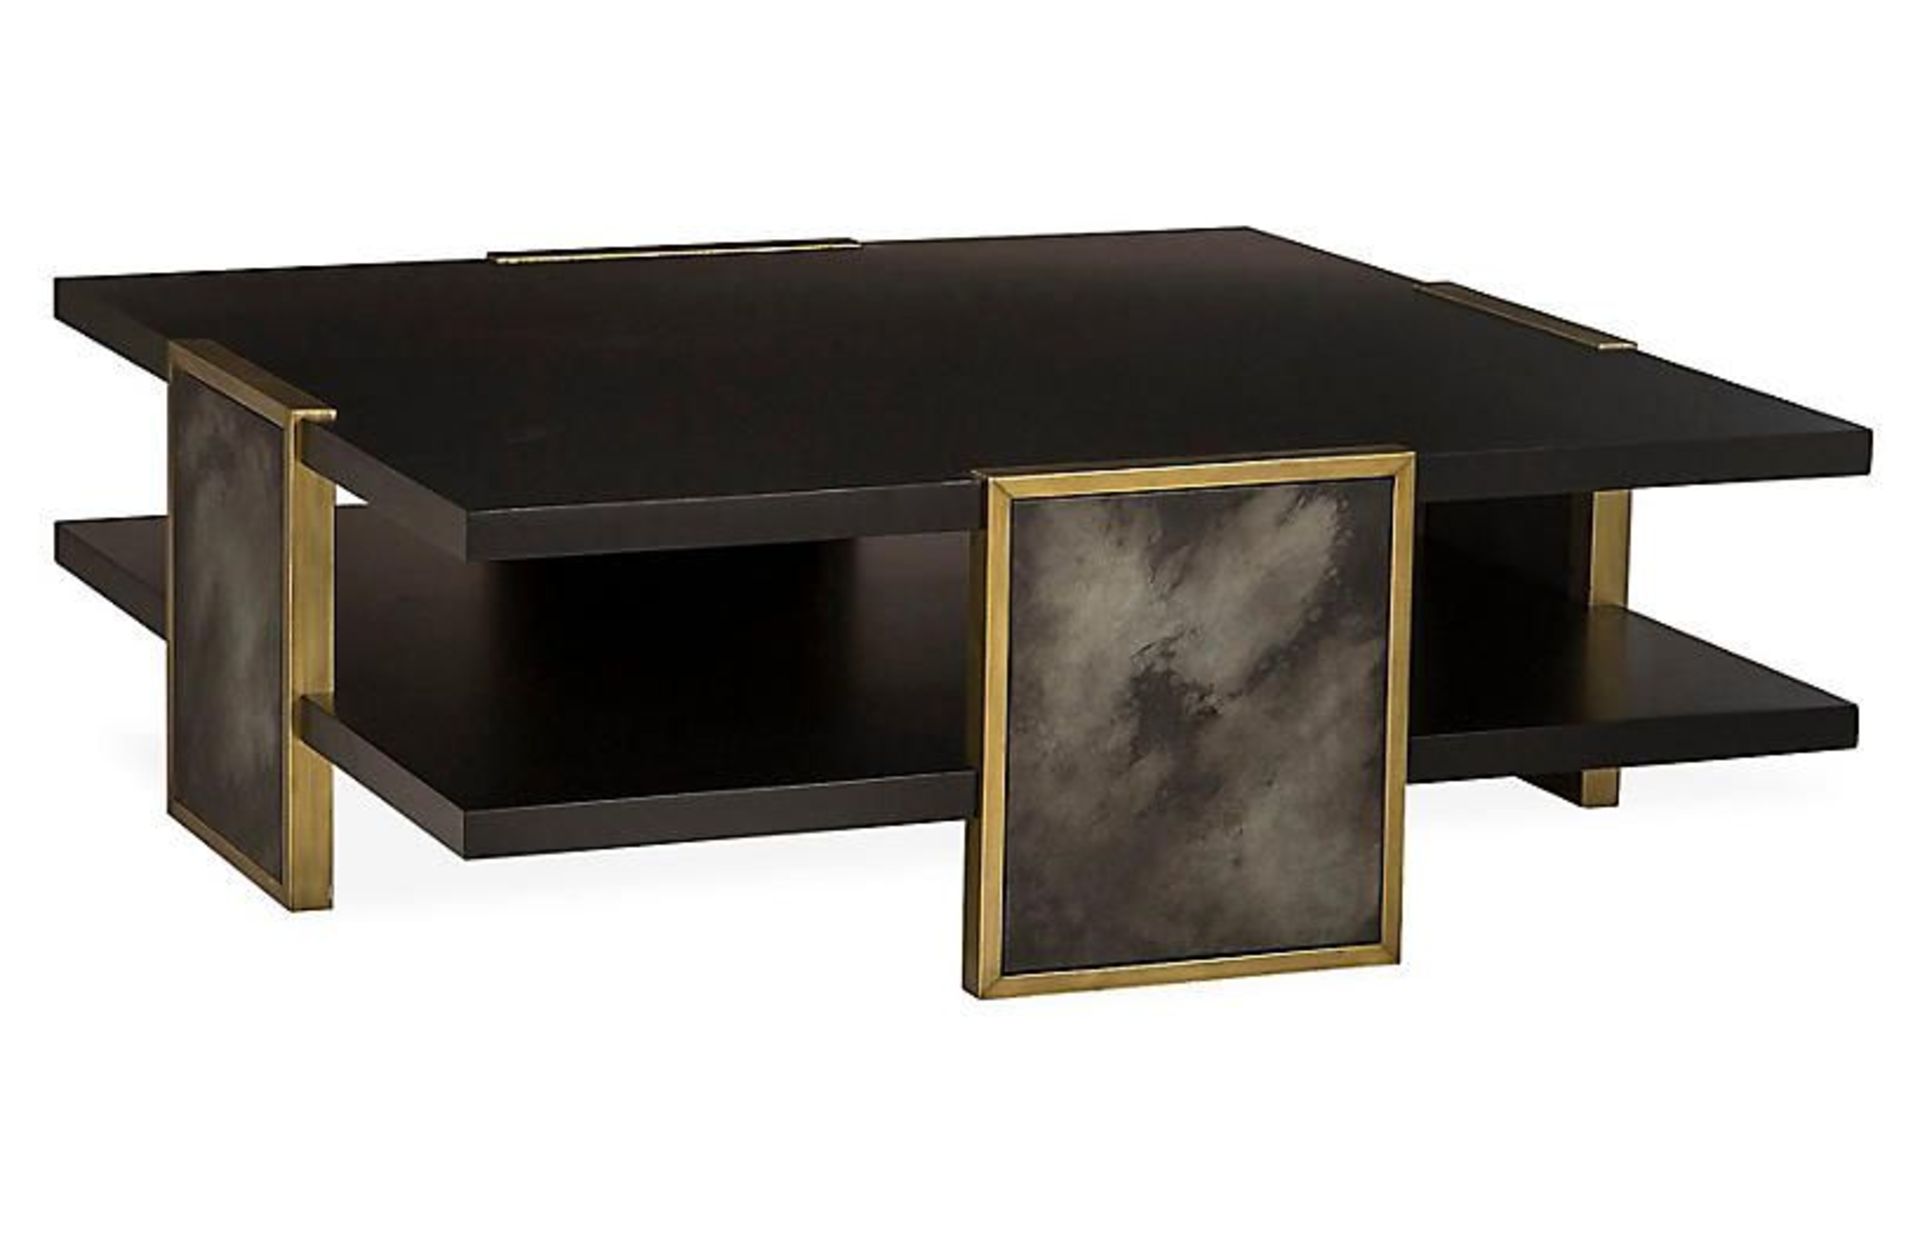 Knox Coffee Table Thoughtfully Designed With Two Stacked Shelves And Textural Leather-Like Legs